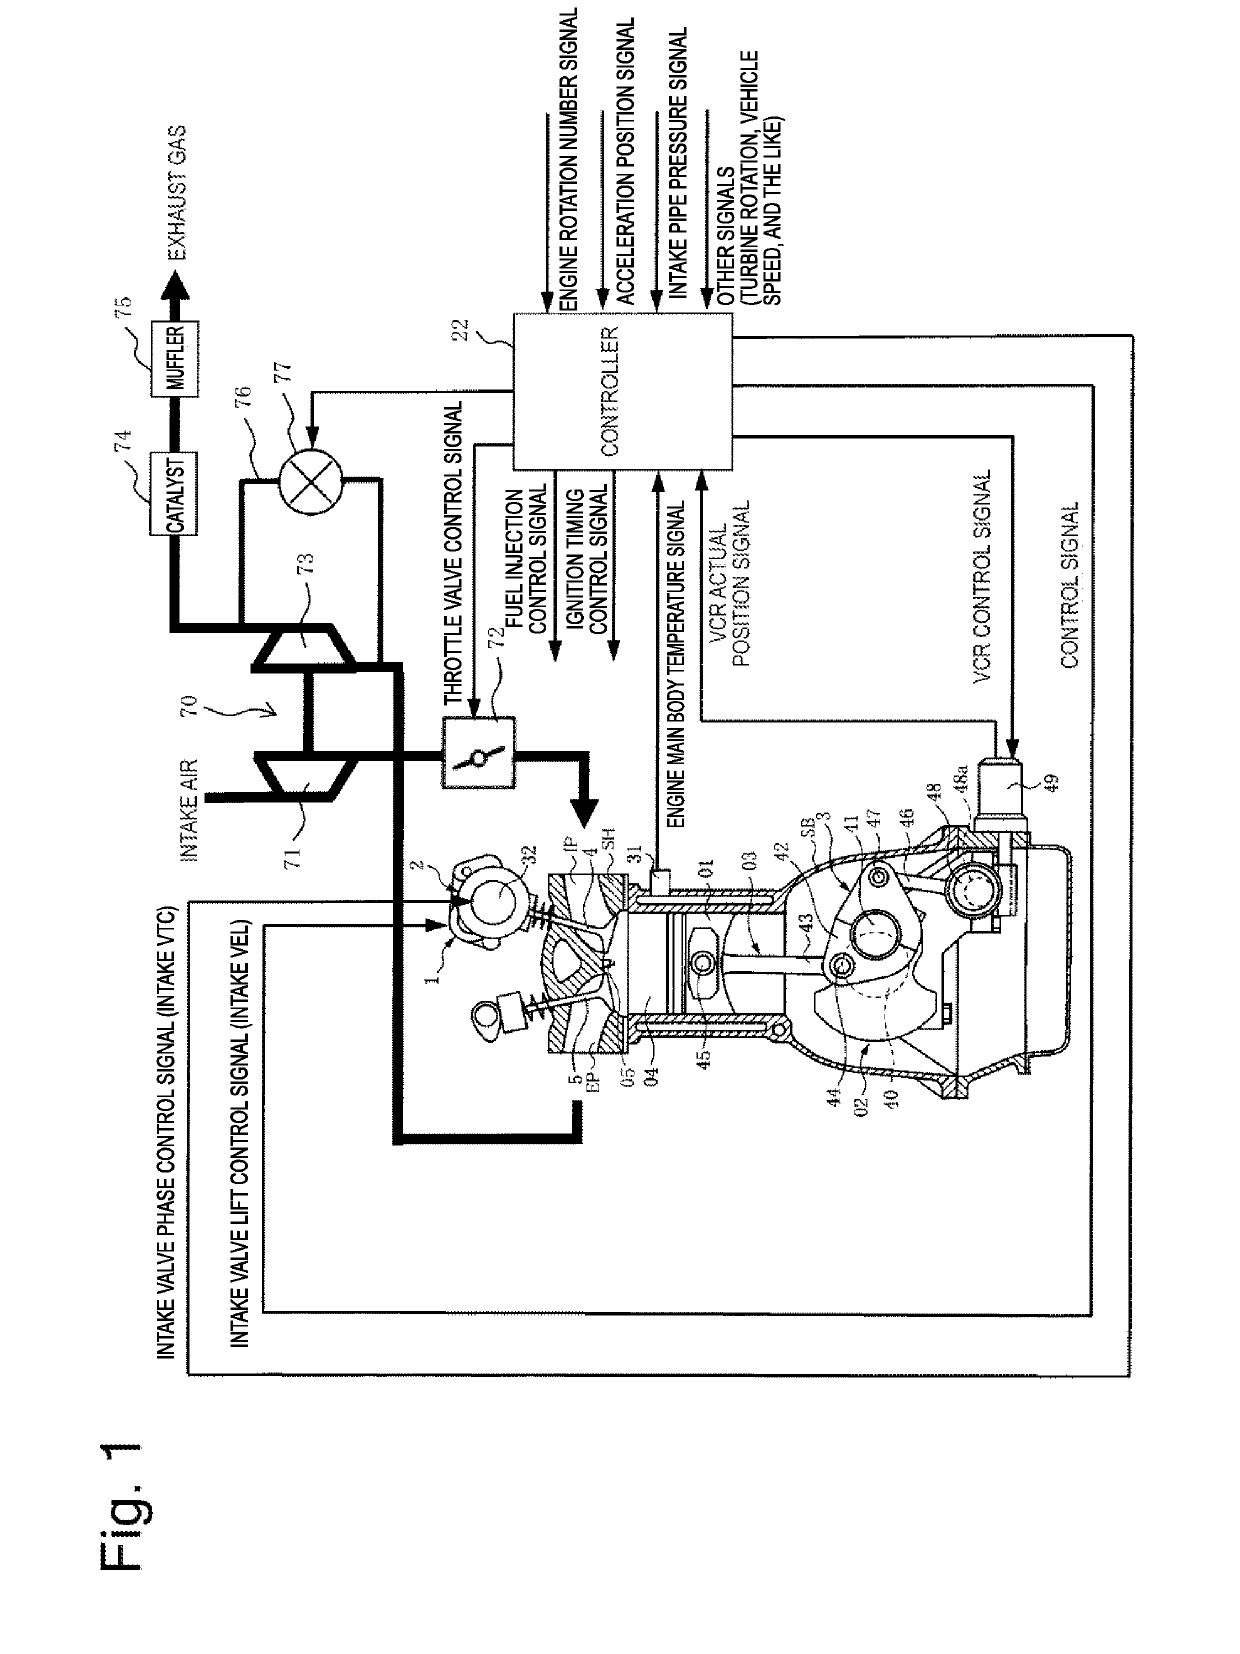 Variable system of internal combustion engine and method for controlling the same